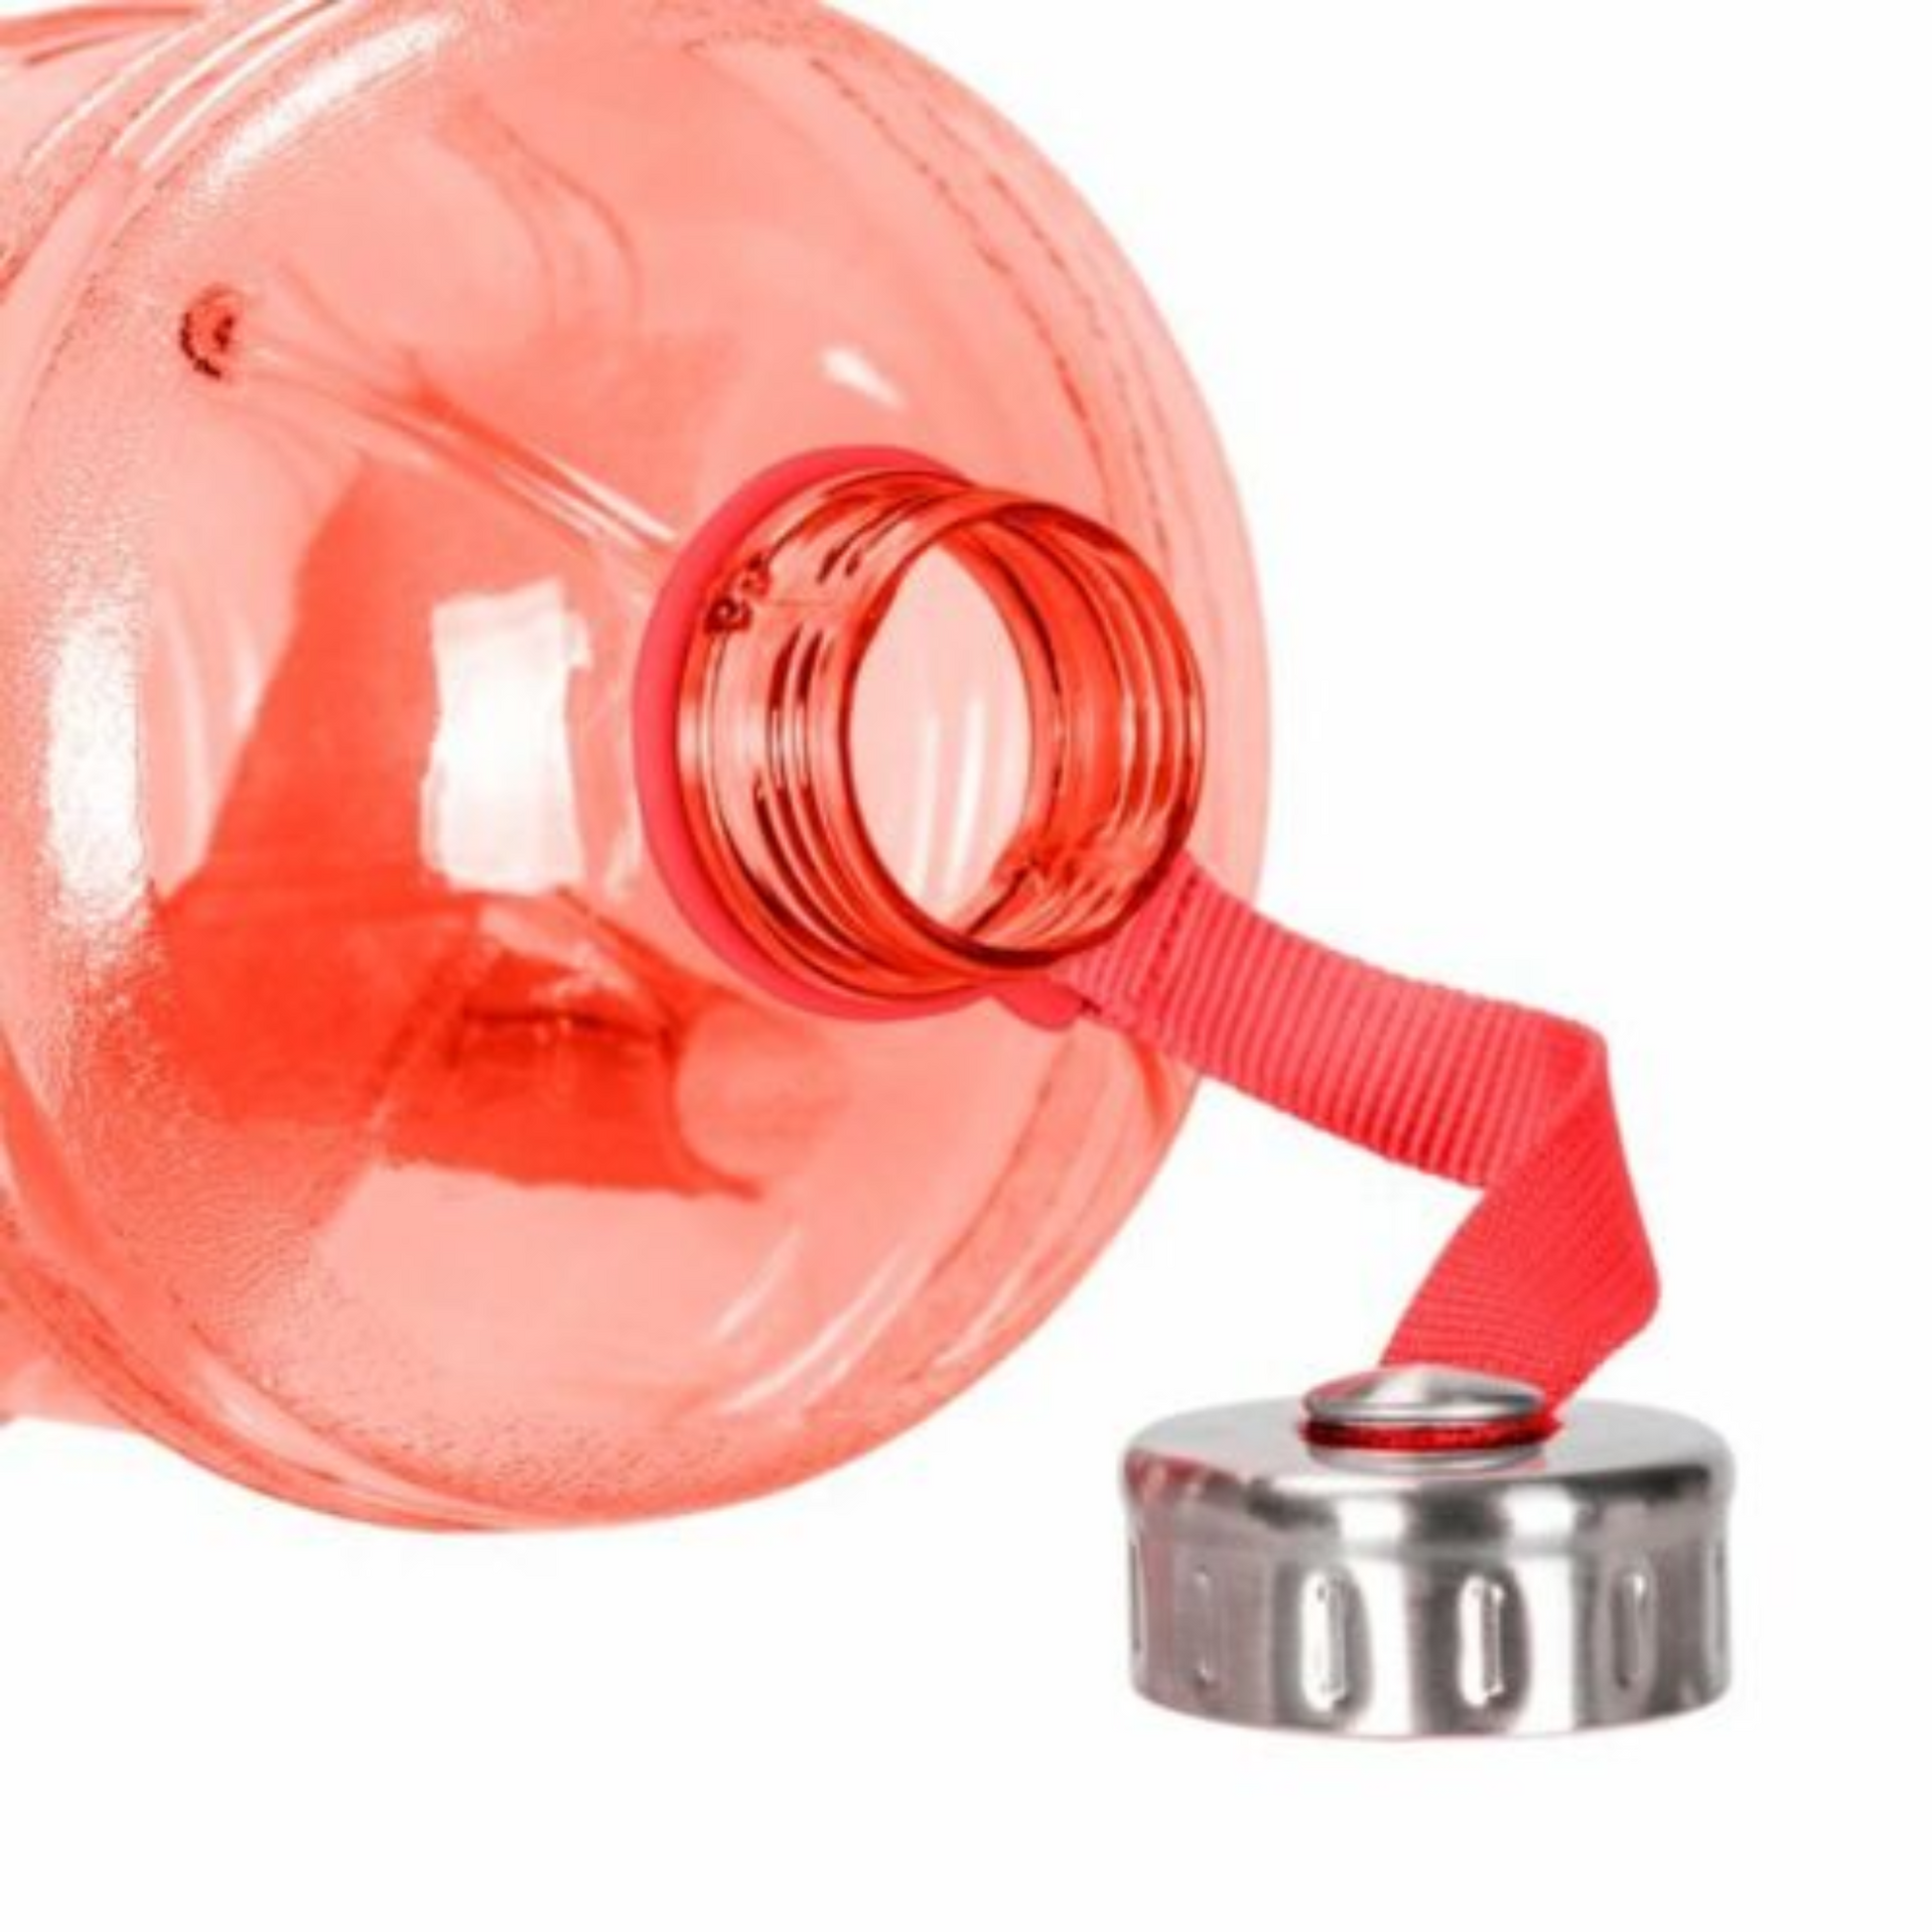 1-gallon water bottle in red, with a twist cap and built-in handle for convenient use at home or on the go